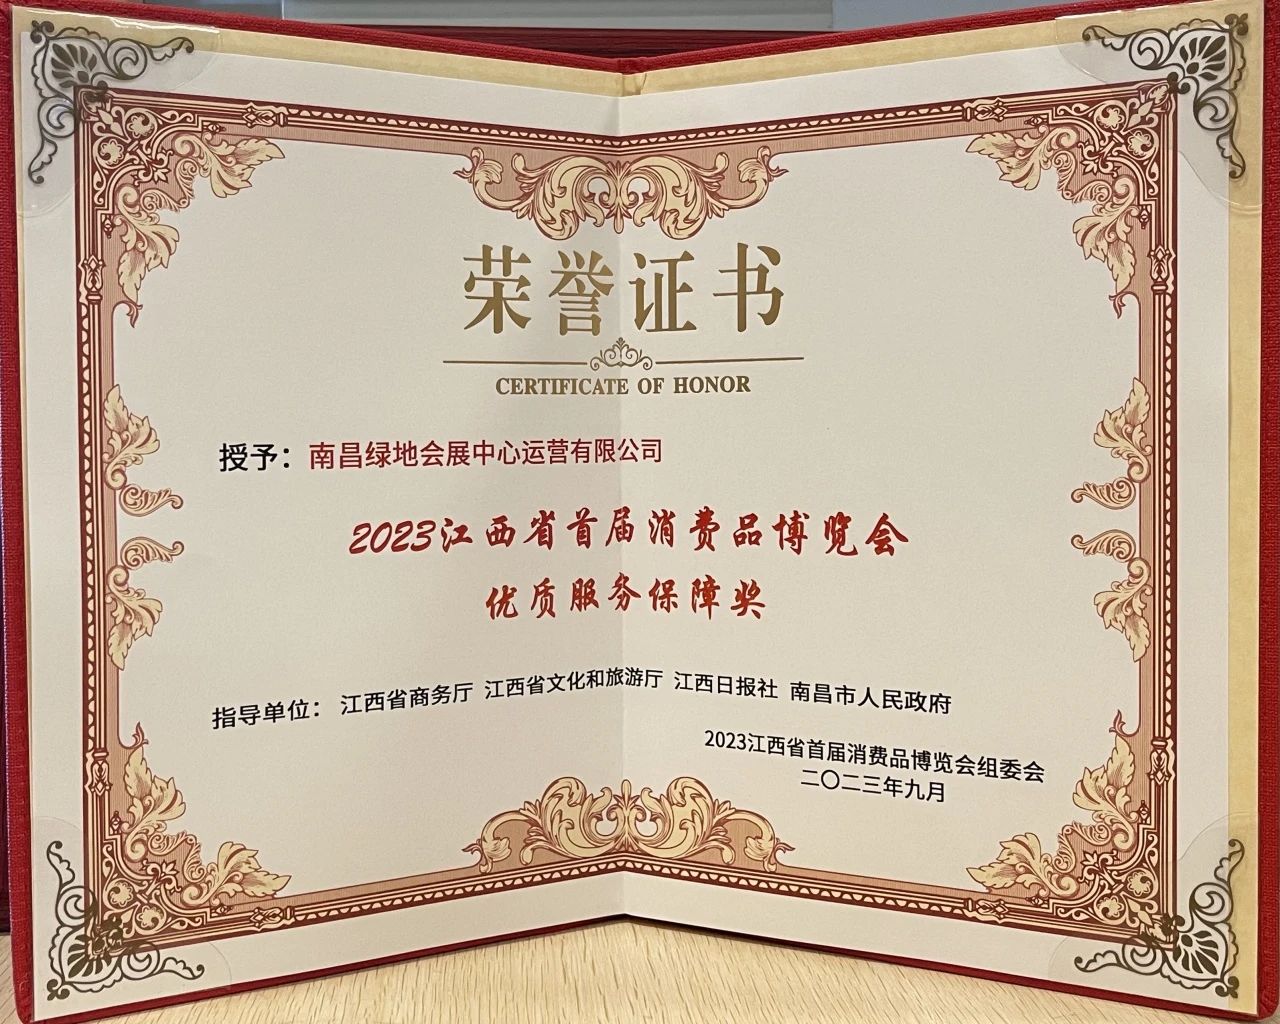 Great News! Nanchang GreenLand International Expo Center Receives Awards from Event Organizers Again Again And Again！